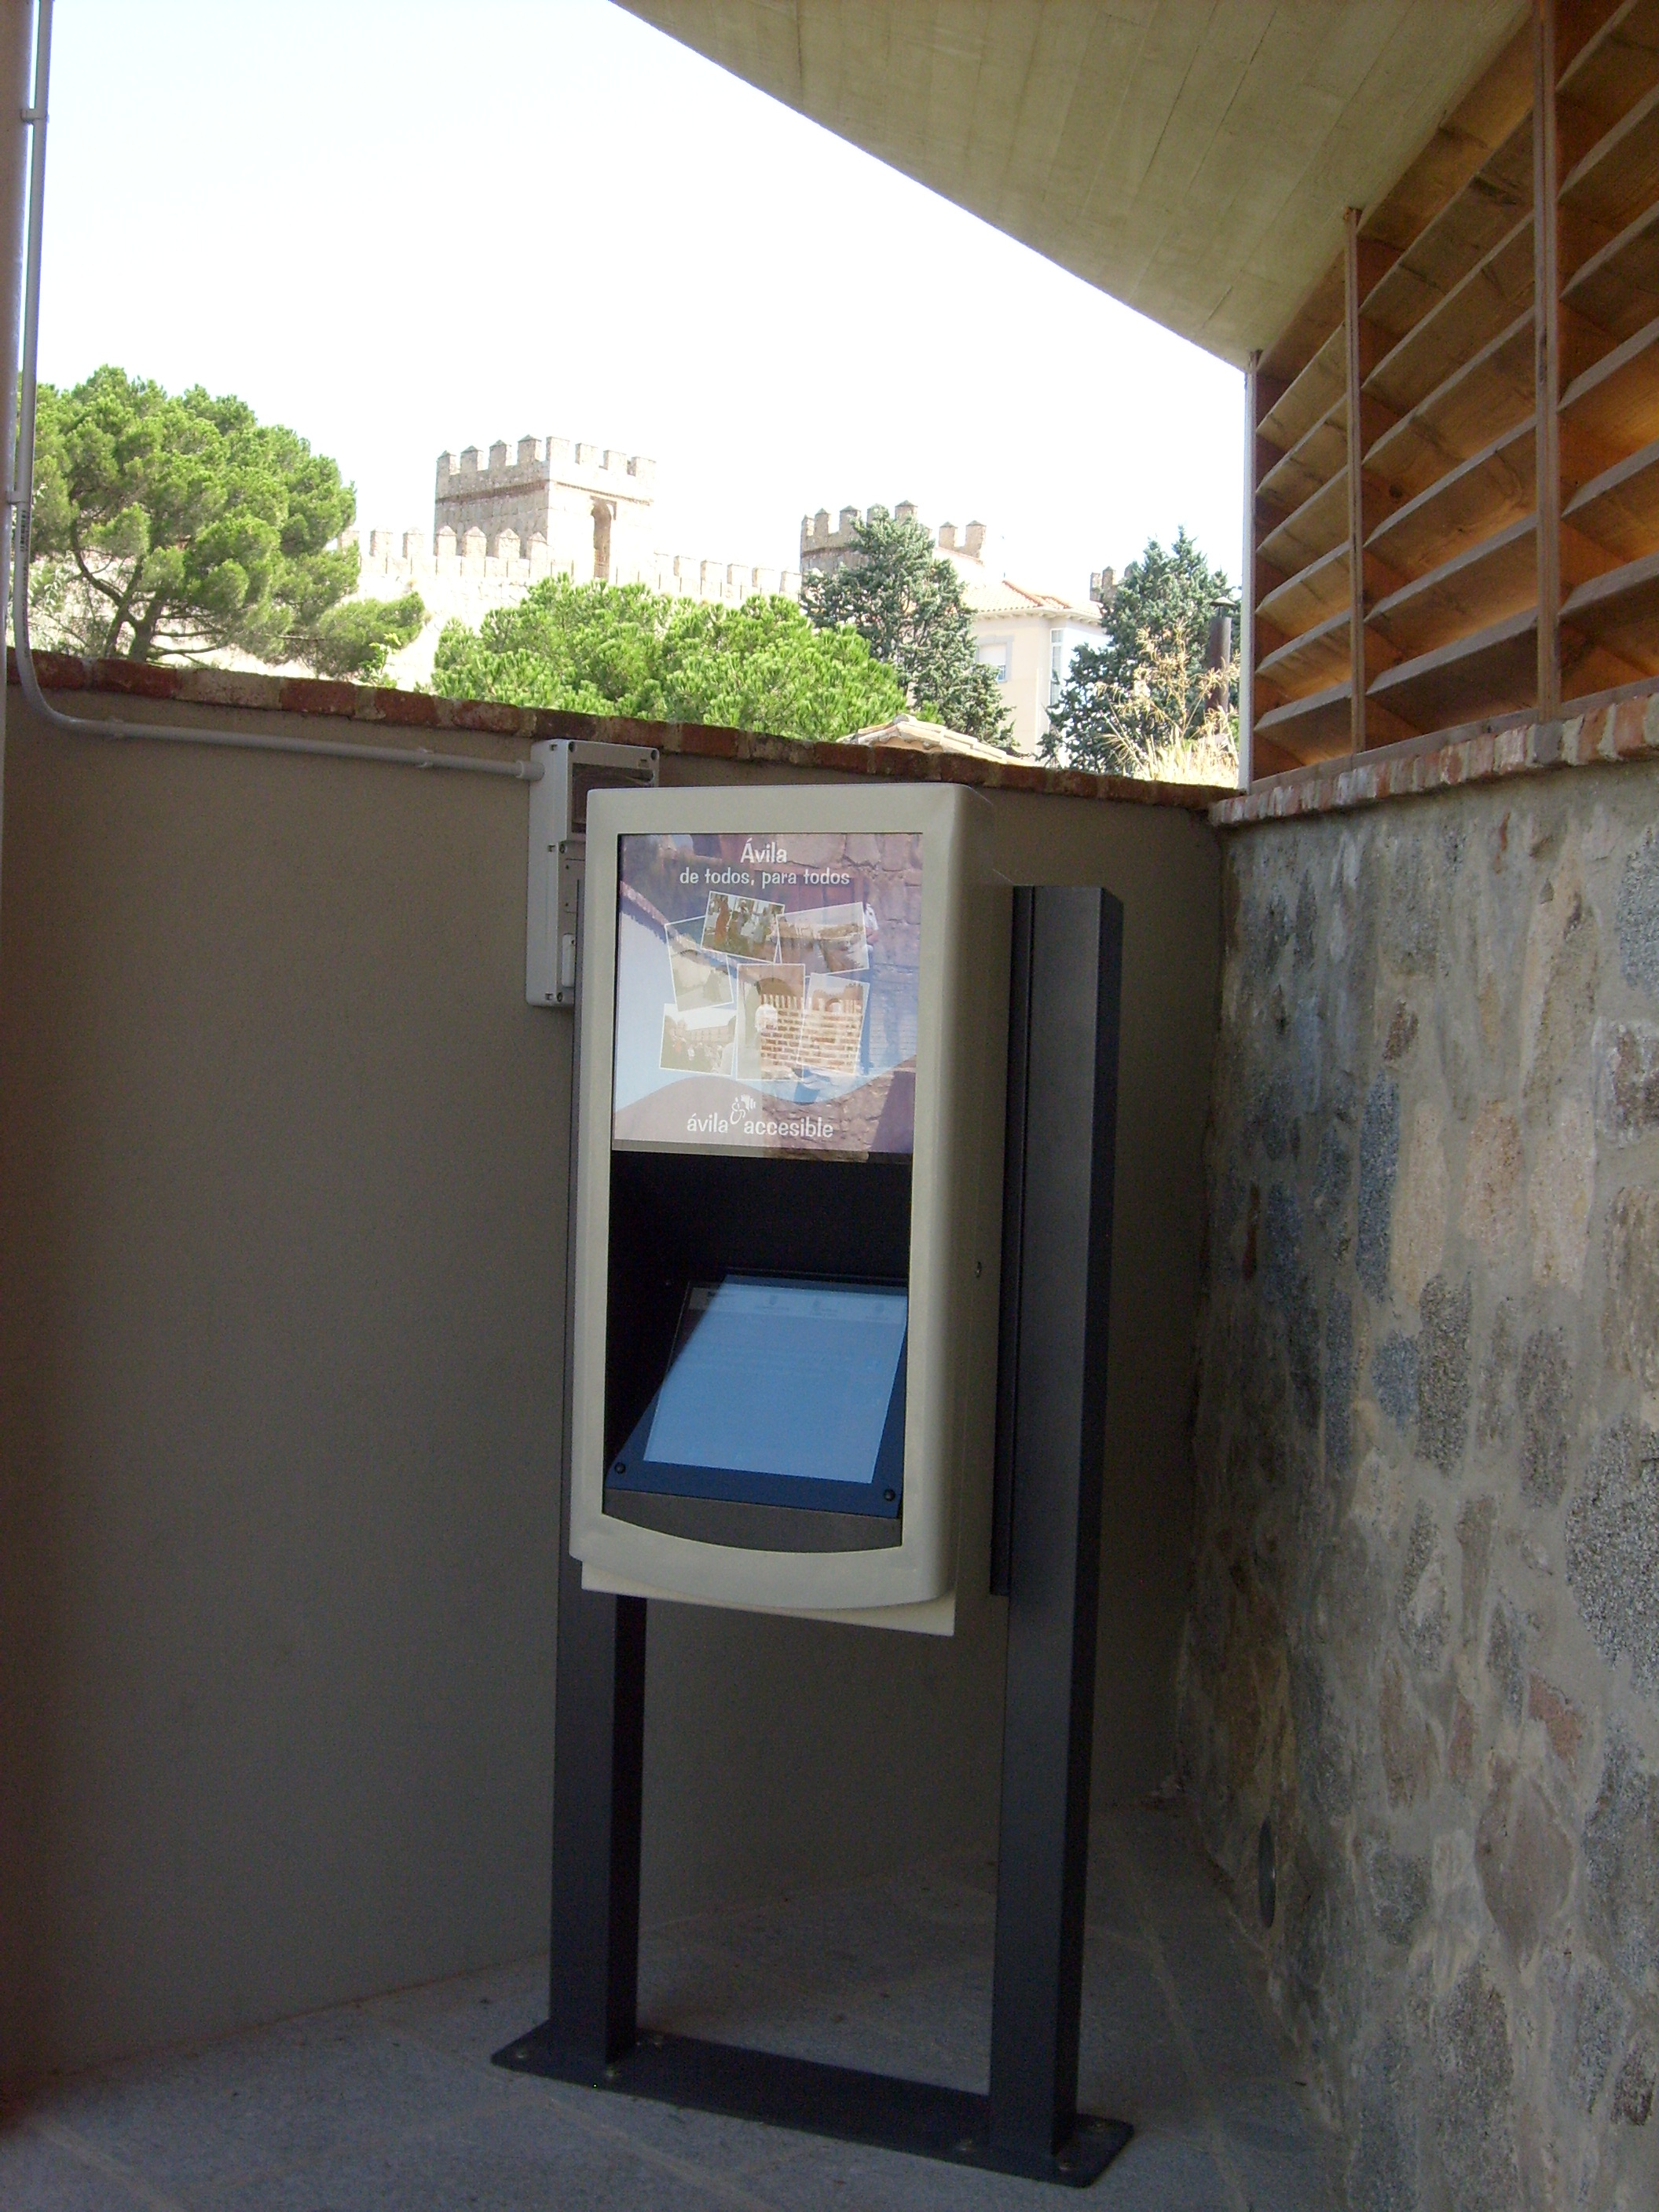 The accessible information point, with information in multiple formats – visual, audible and sign language 